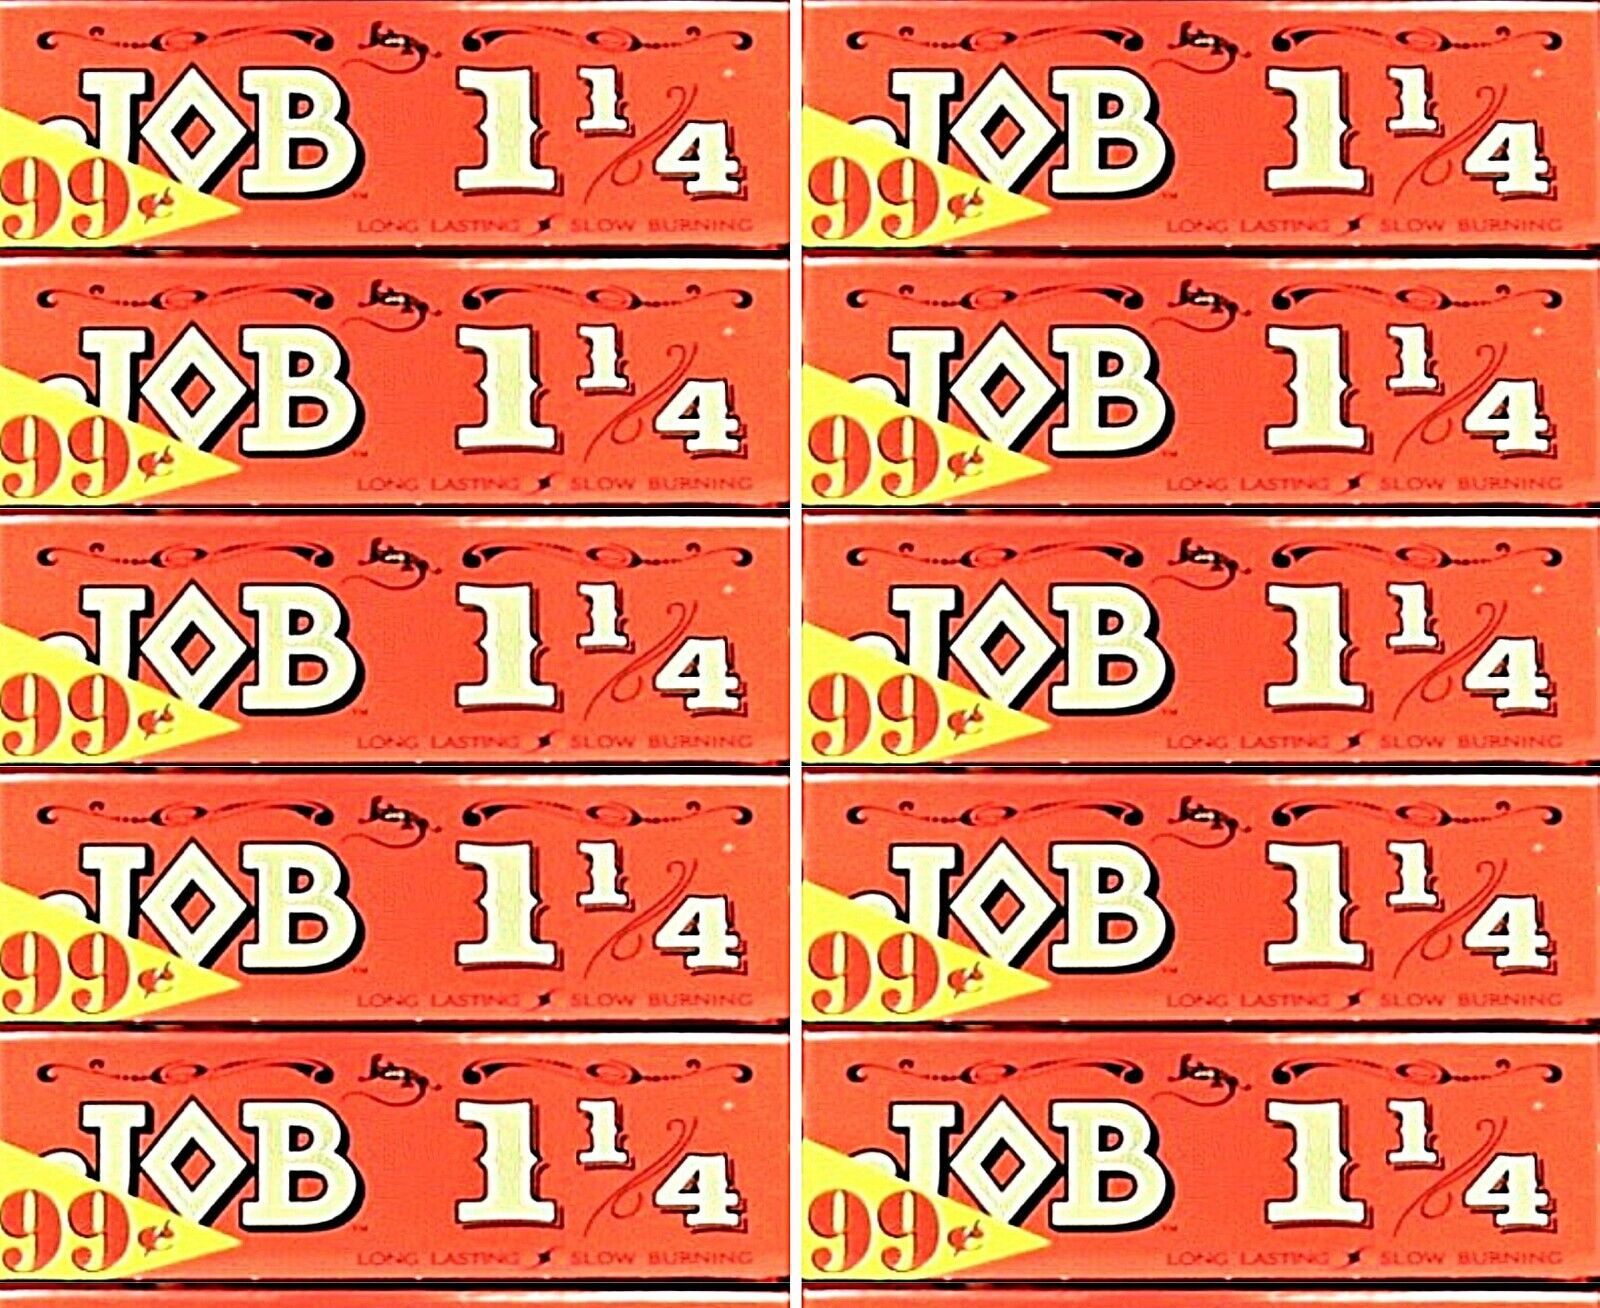 10x Job 1 1/4 Rolling Papers Orange Red 100% Authentic *Great Price*USA Shipped*